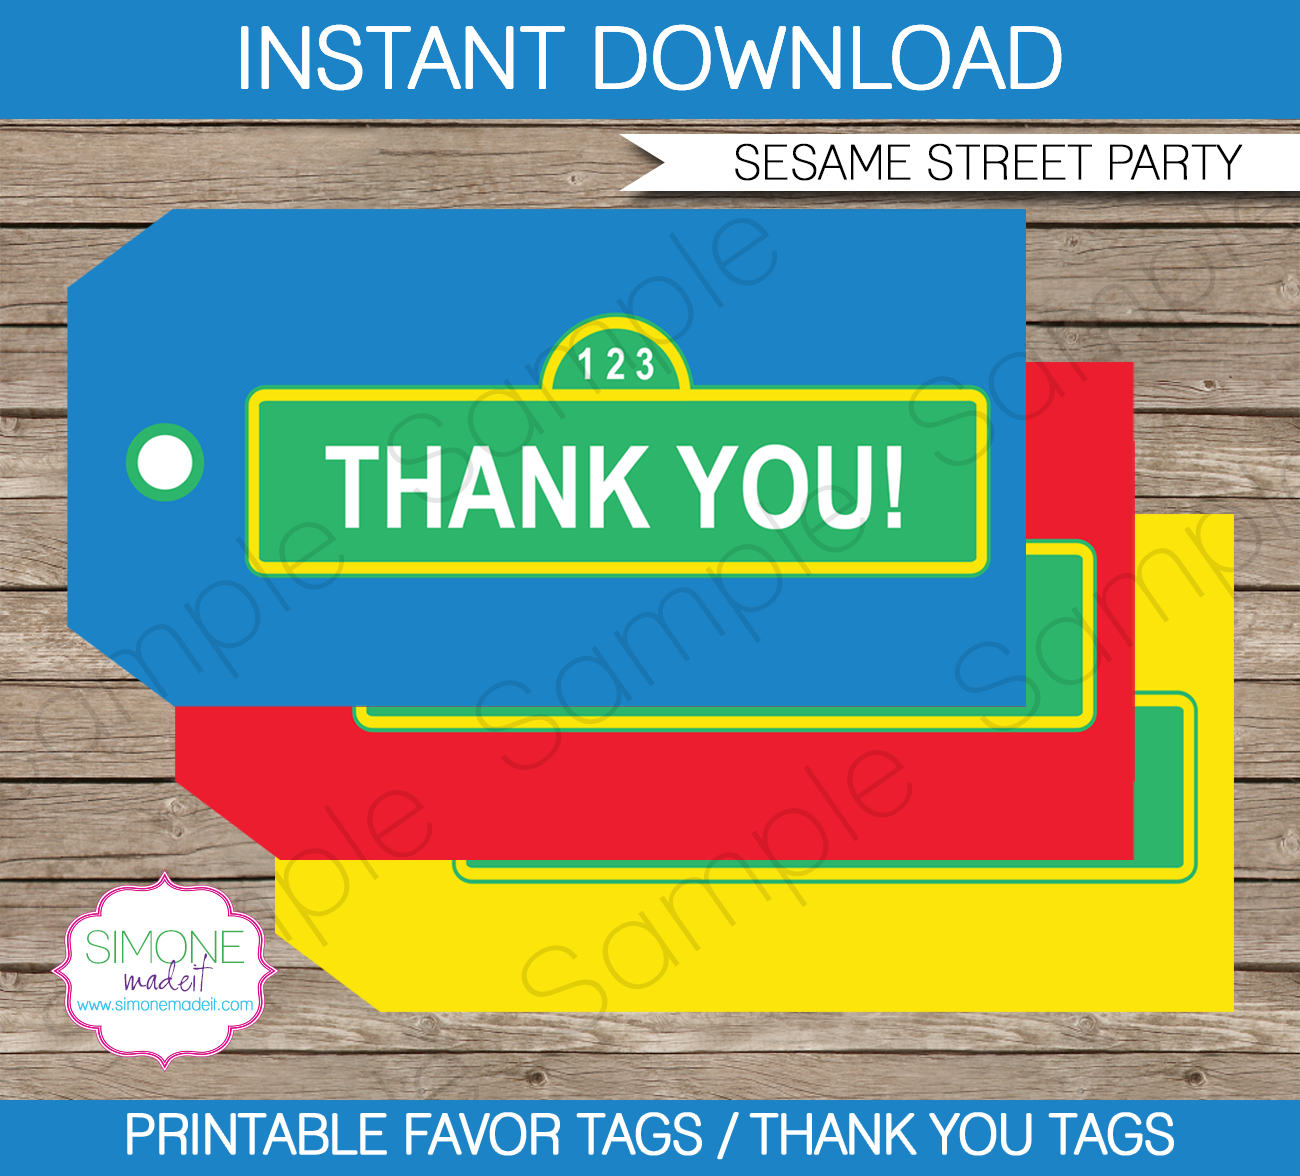 Sesame Street Birthday Party Favor Tags | Thank You Tags | Editable DIY Template | $3.00 INSTANT DOWNLOAD via SIMONEmadeit.com